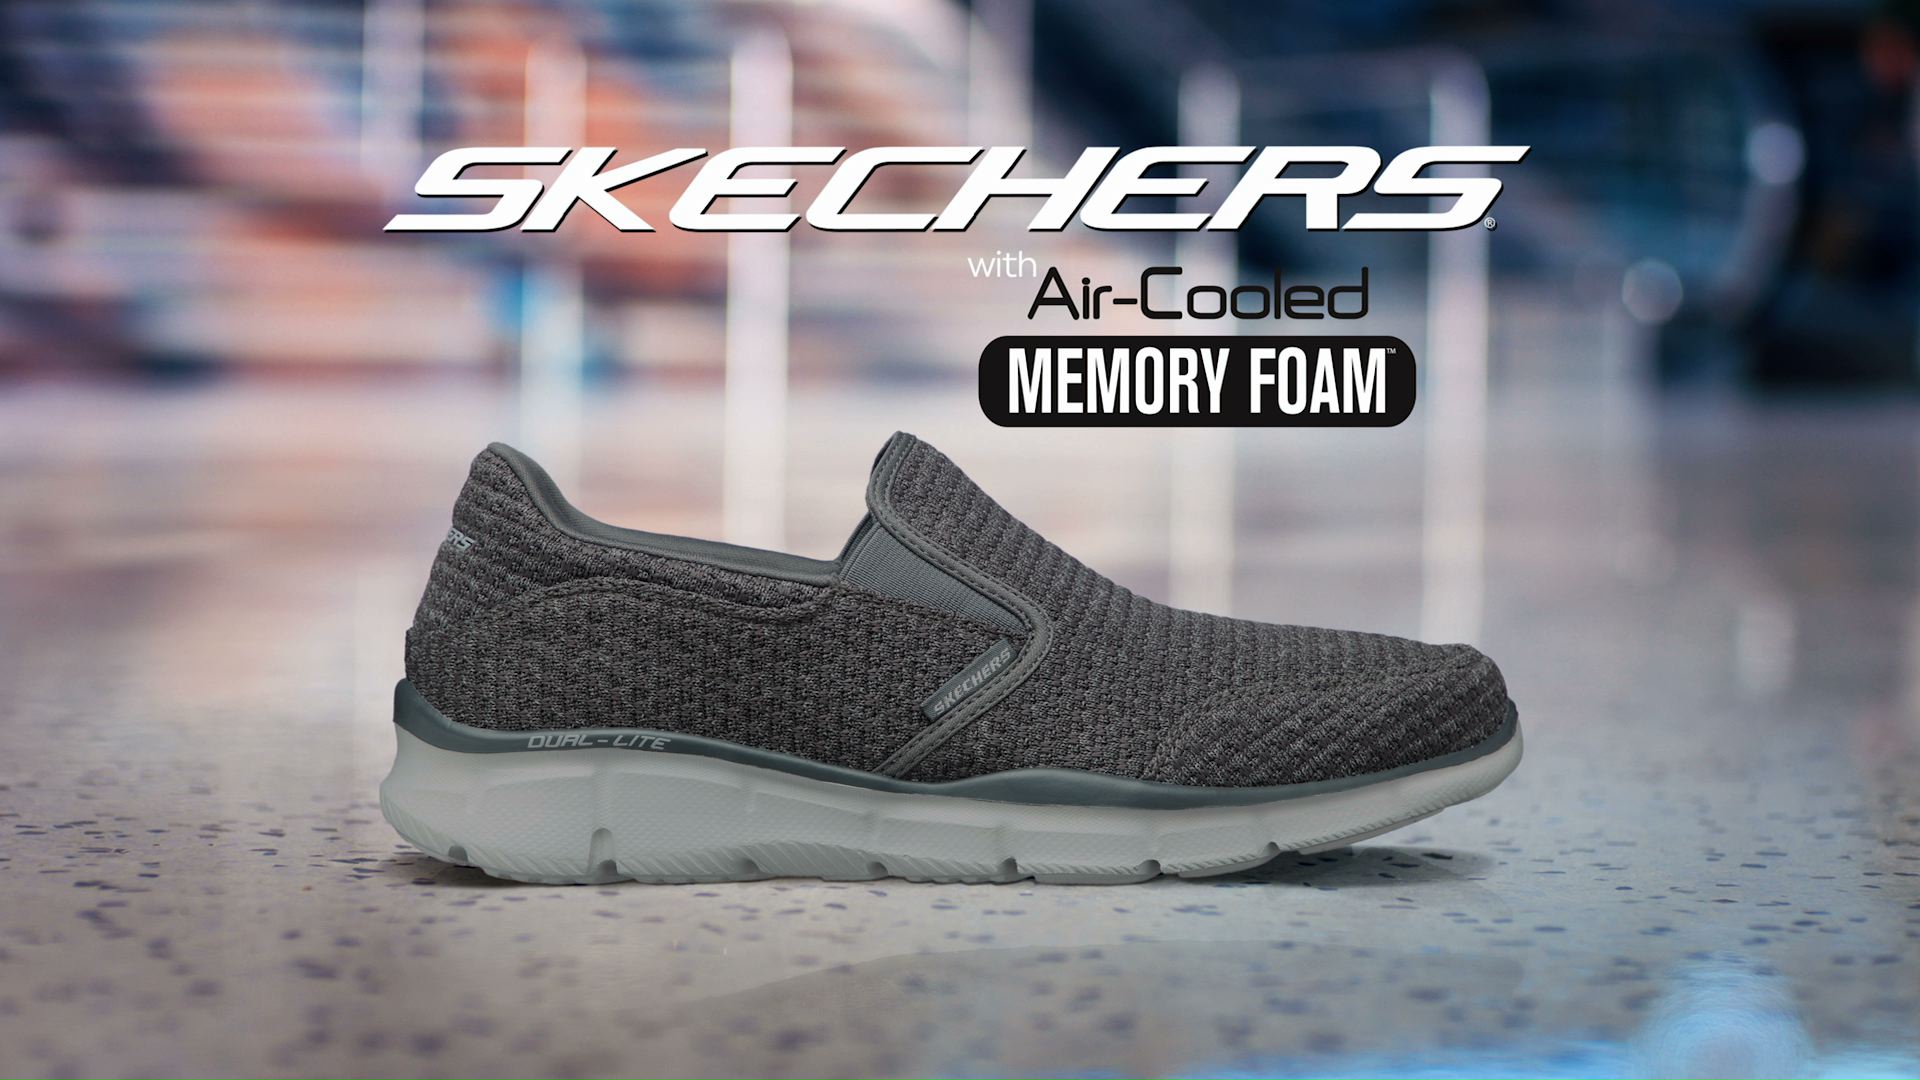 skechers shoes ads